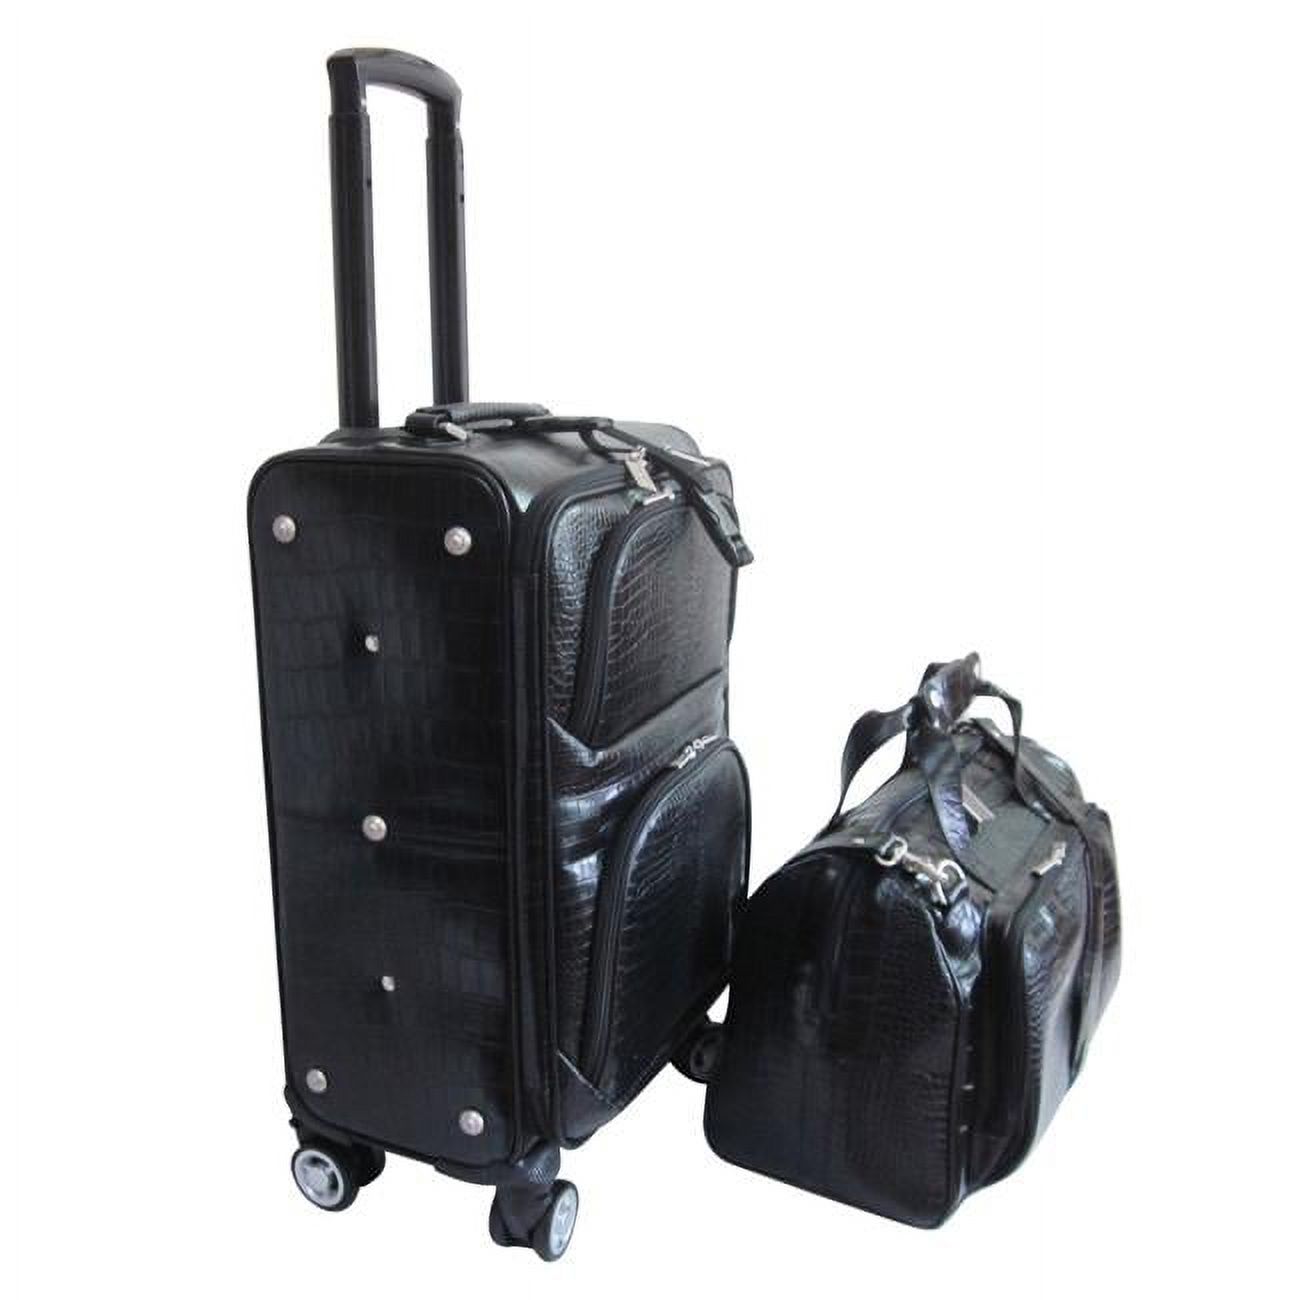 Black Leather Croco-Print 2-Piece Carry-On Spinner Luggage Set - image 1 of 4